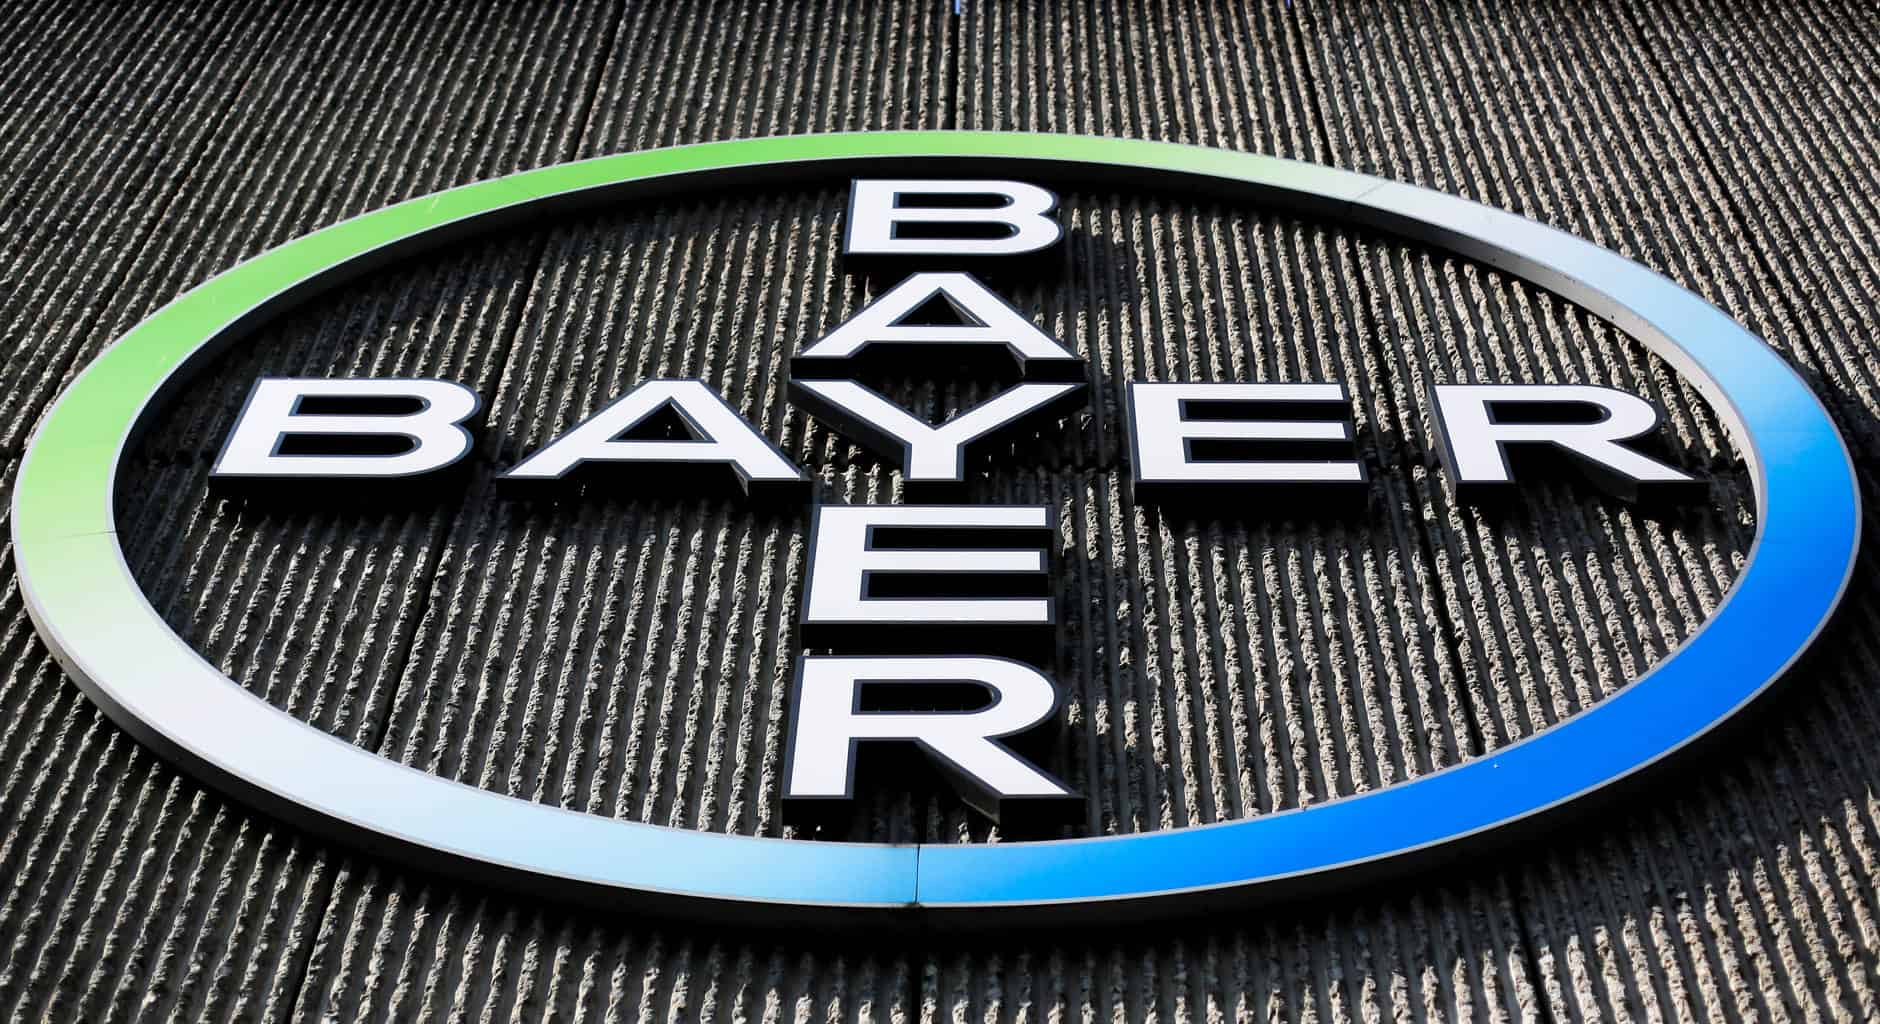 Bayer AG Welcomes Judge’s Decision to reduce $2 Billion in Damages